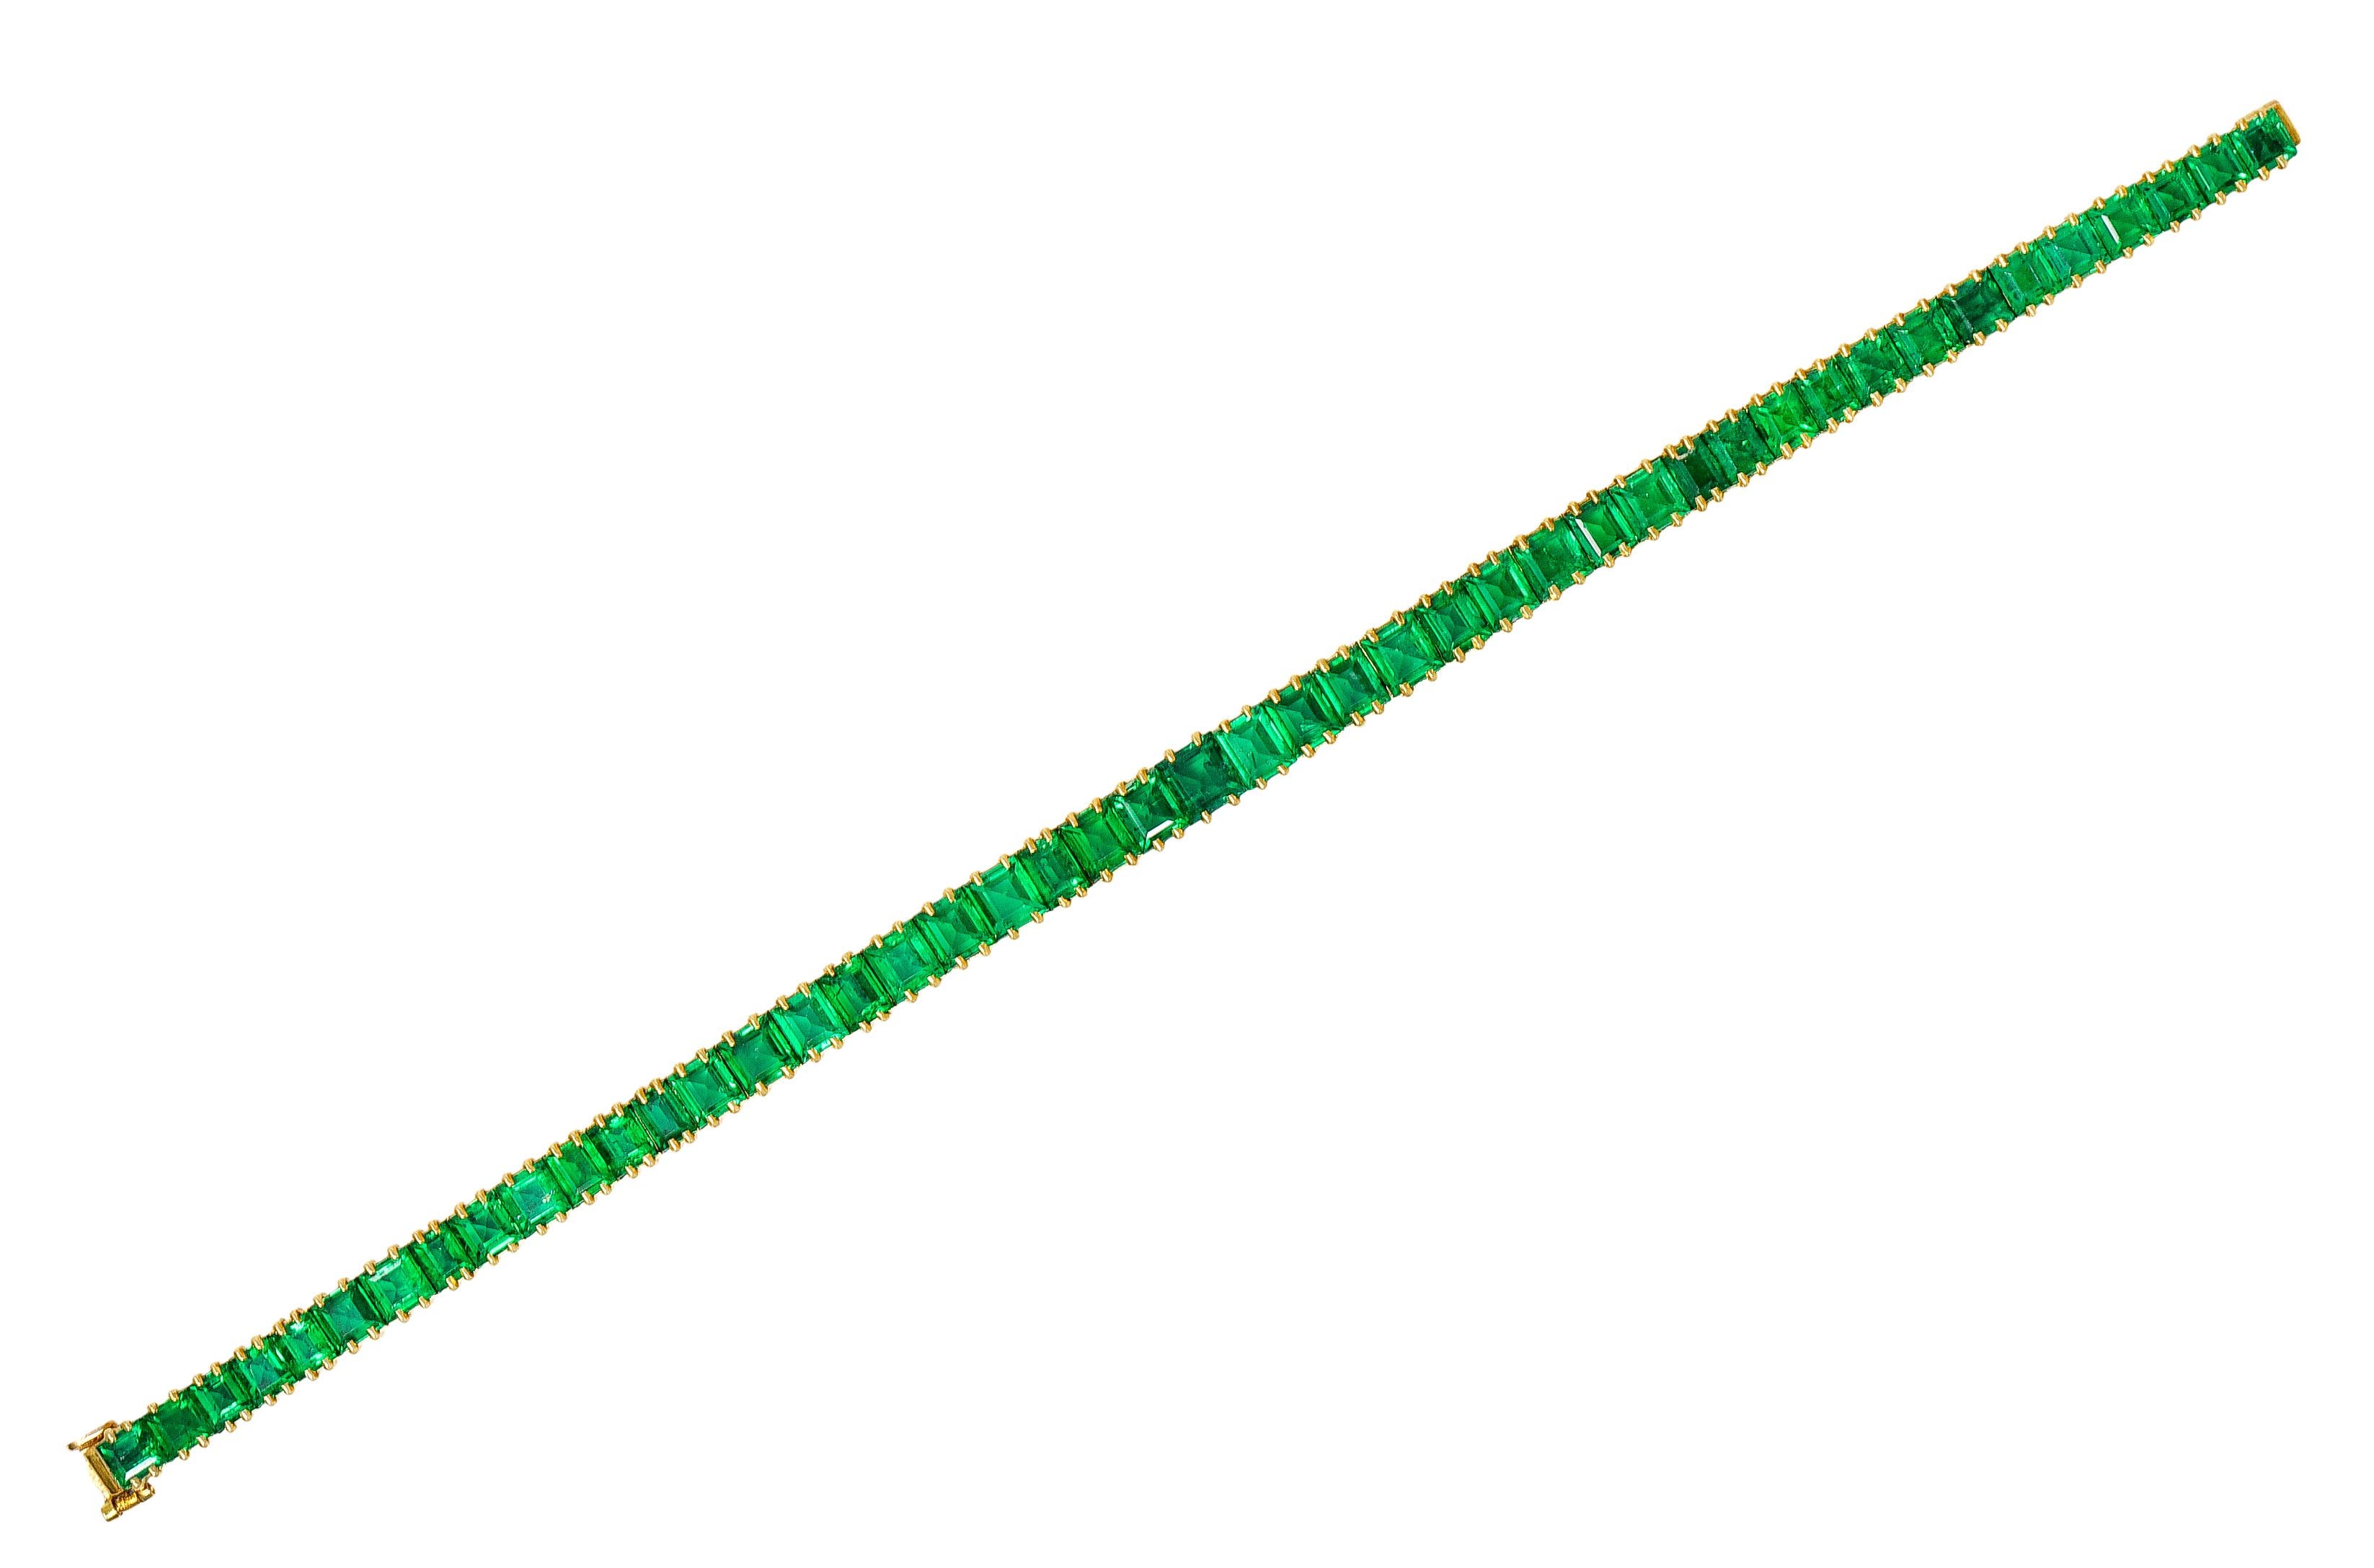 Line bracelet is comprised of basket set emerald cut emeralds - subtly graduating in size

Well matched and vividly green in color while weighing in total approximately 12.50 carats

Completed by a concealed clasp with fold-over safety

Stamped with